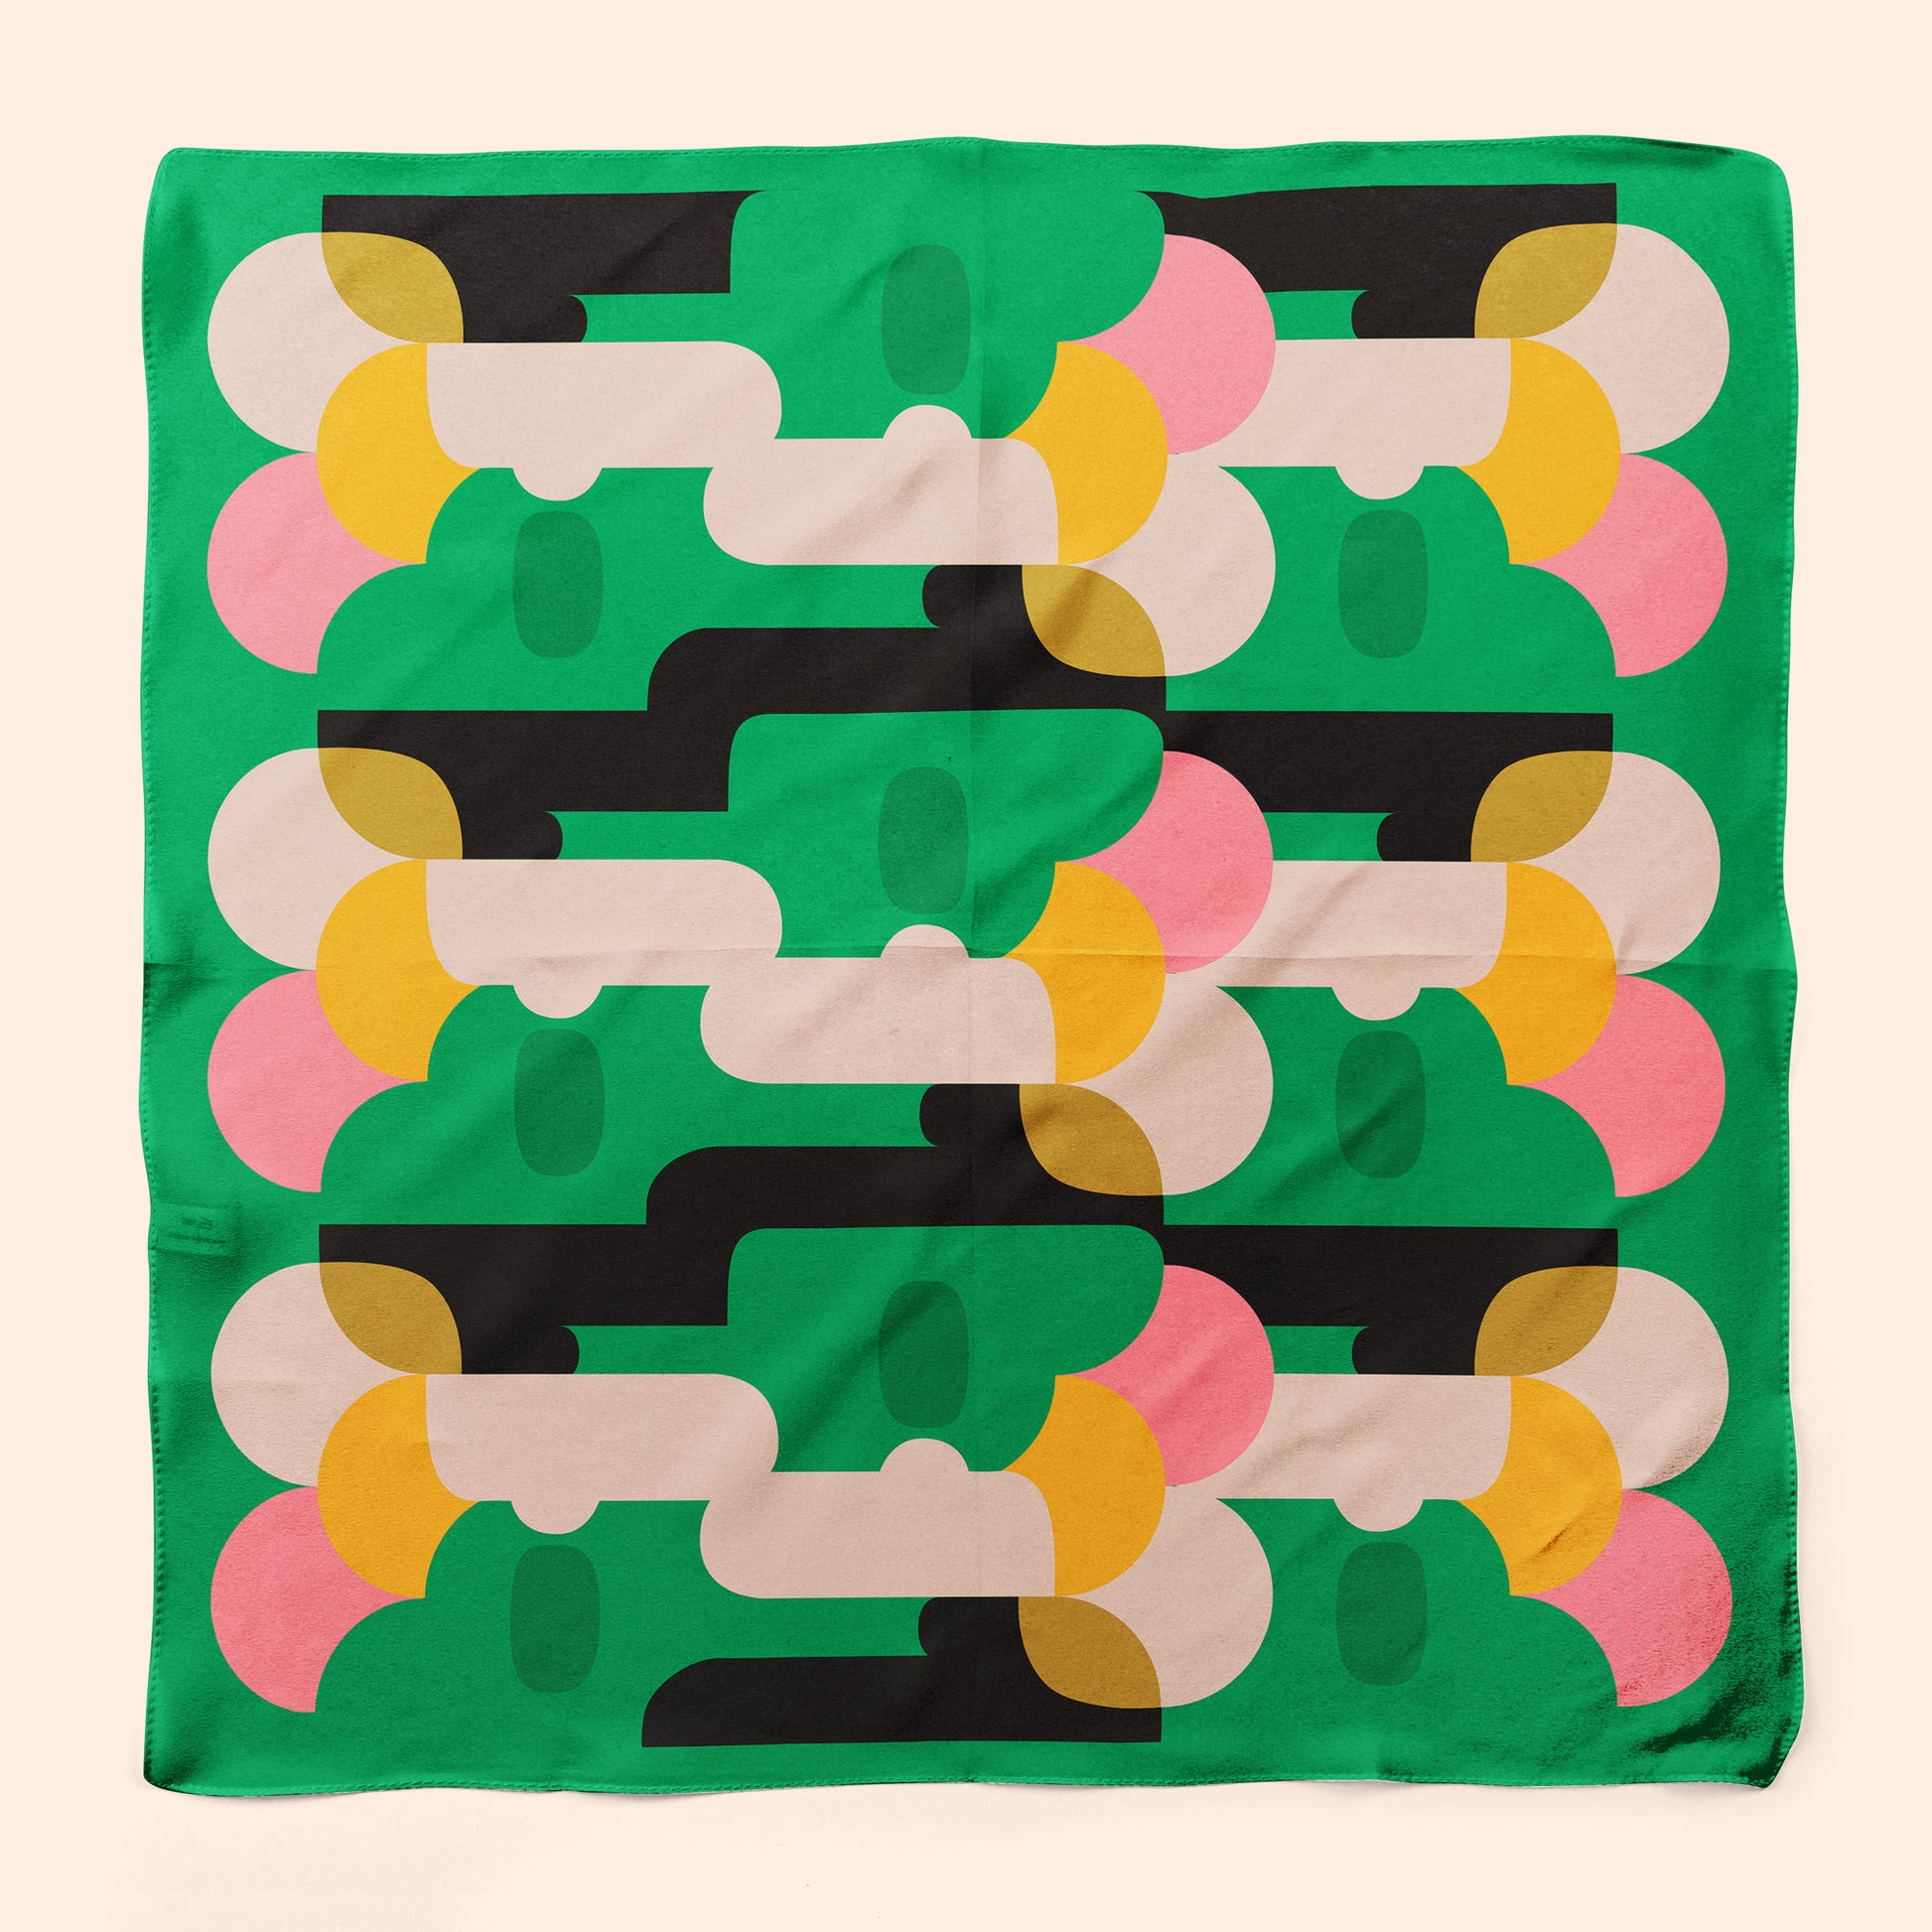 Make a statement with this bold green 100% silk scarf. Wear it as a neckerchief or as a hair wrap. It's too gorgeous not to show off